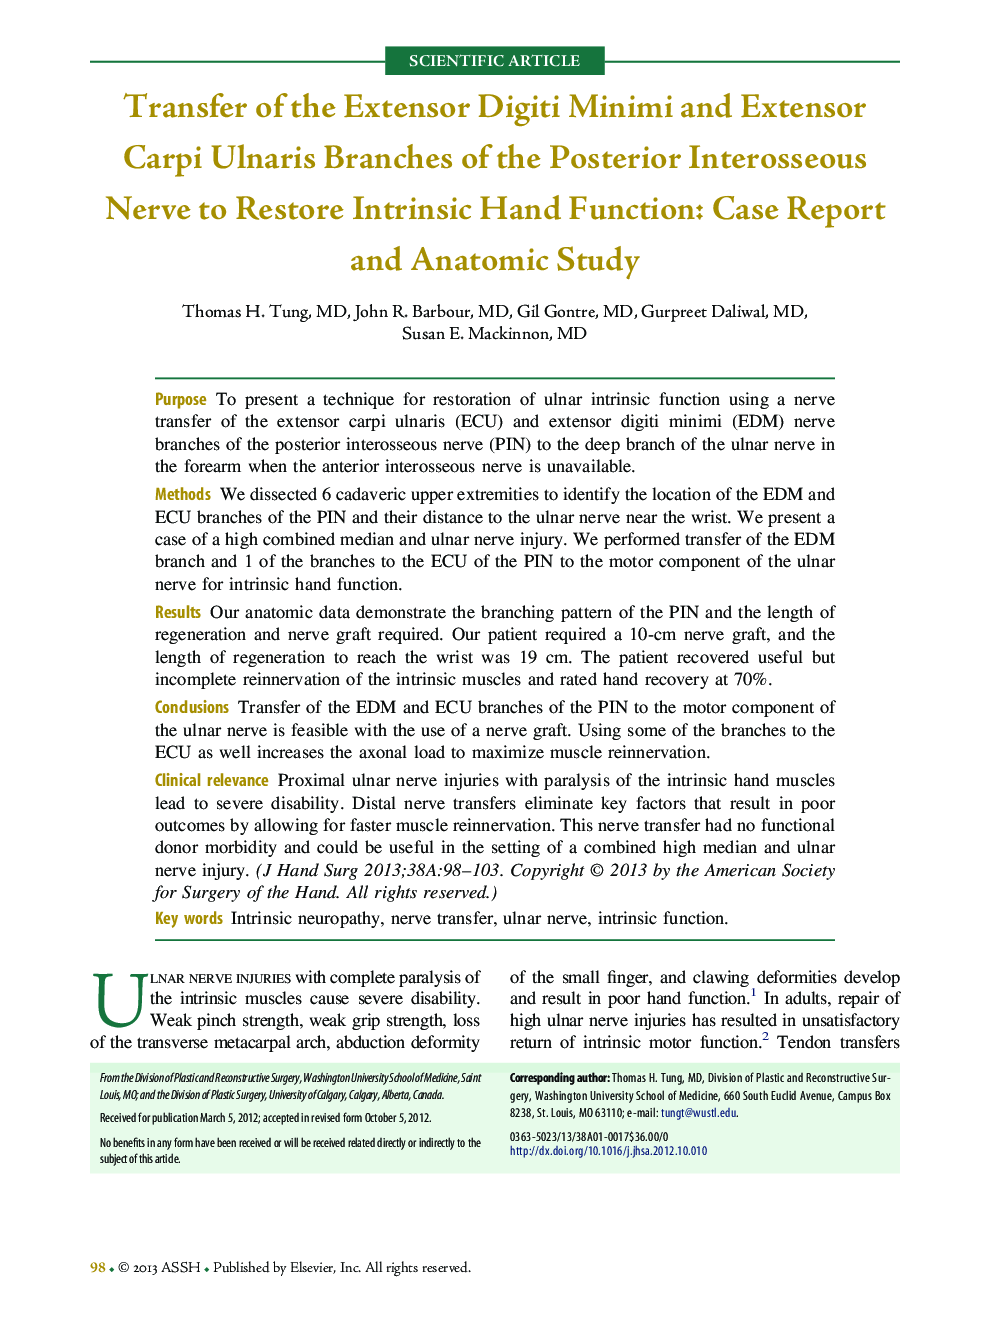 Transfer of the Extensor Digiti Minimi and Extensor Carpi Ulnaris Branches of the Posterior Interosseous Nerve to Restore Intrinsic Hand Function: Case Report and Anatomic Study 